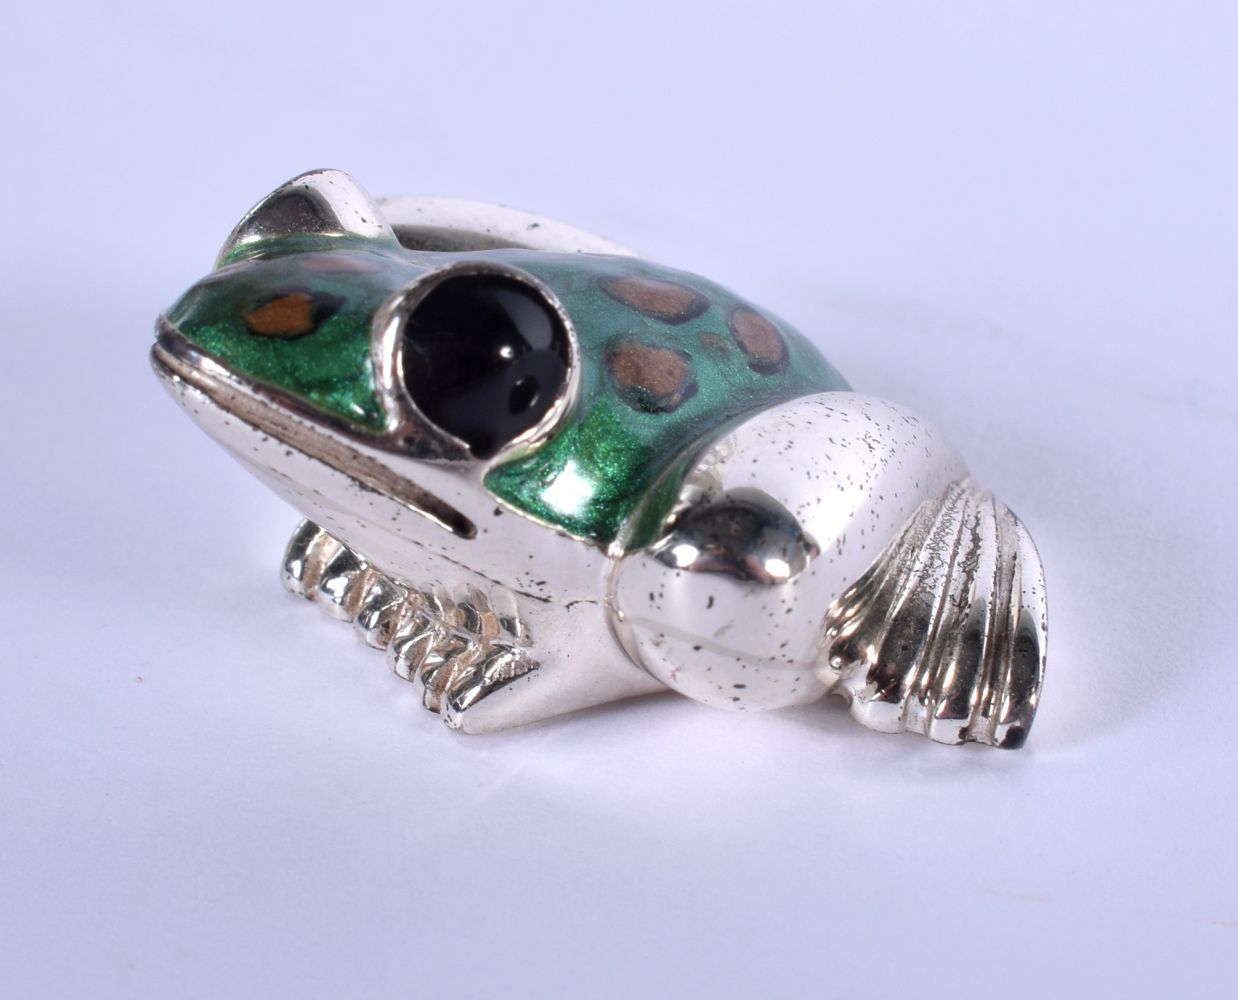 A SILVER AND ENAMEL FROG. 23 grams. 3.5 cm x 1.5 cm. - Image 2 of 3